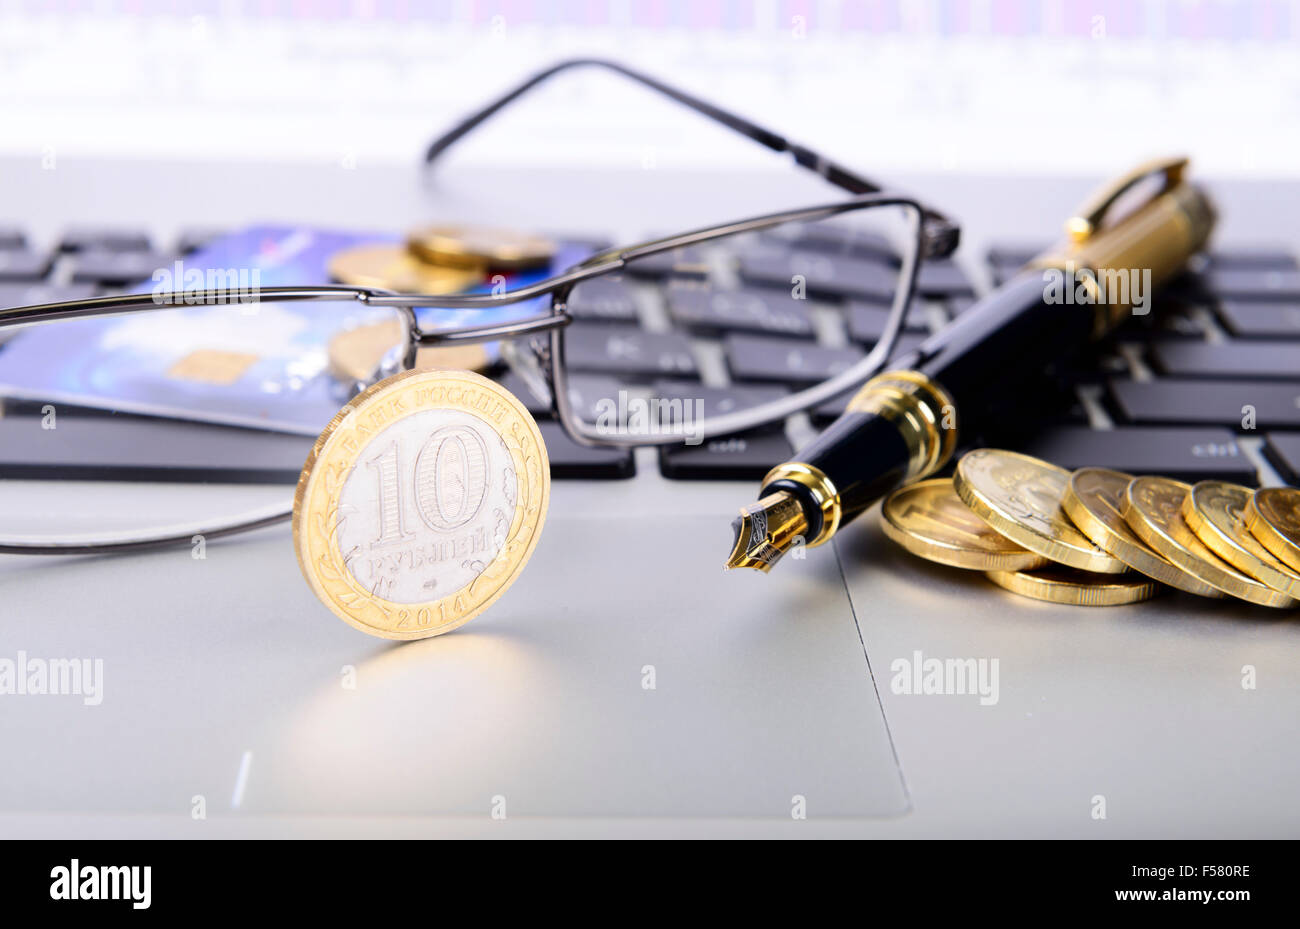 pen, coins, glasses and a bank card on the keyboard Stock Photo